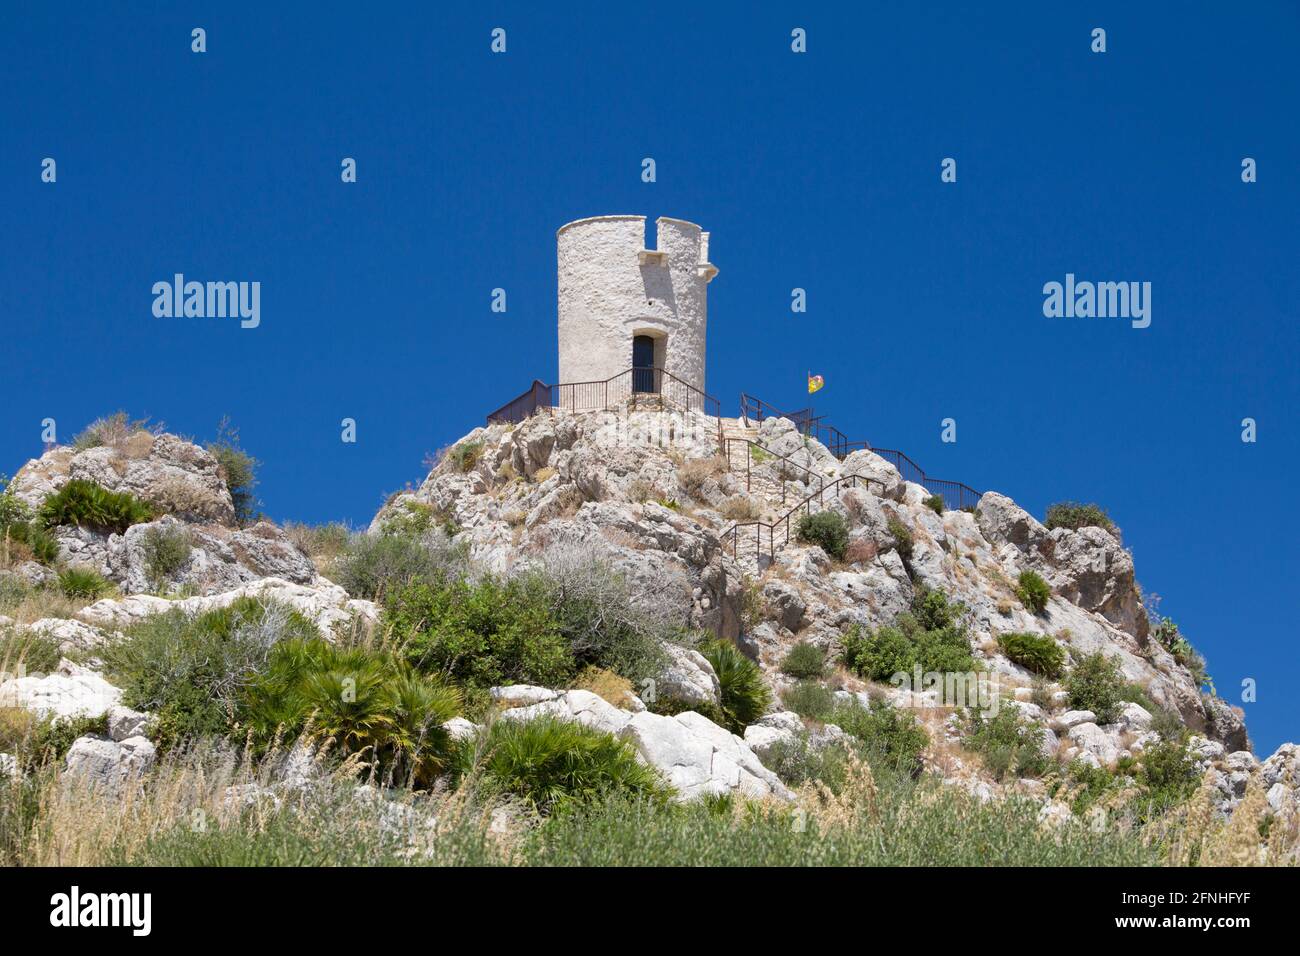 Scopello, Trapani, Sicily, Italy. View across rocky hillside to the Torre Bennistra, a restored medieval watchtower, now a clifftop mirador. Stock Photo